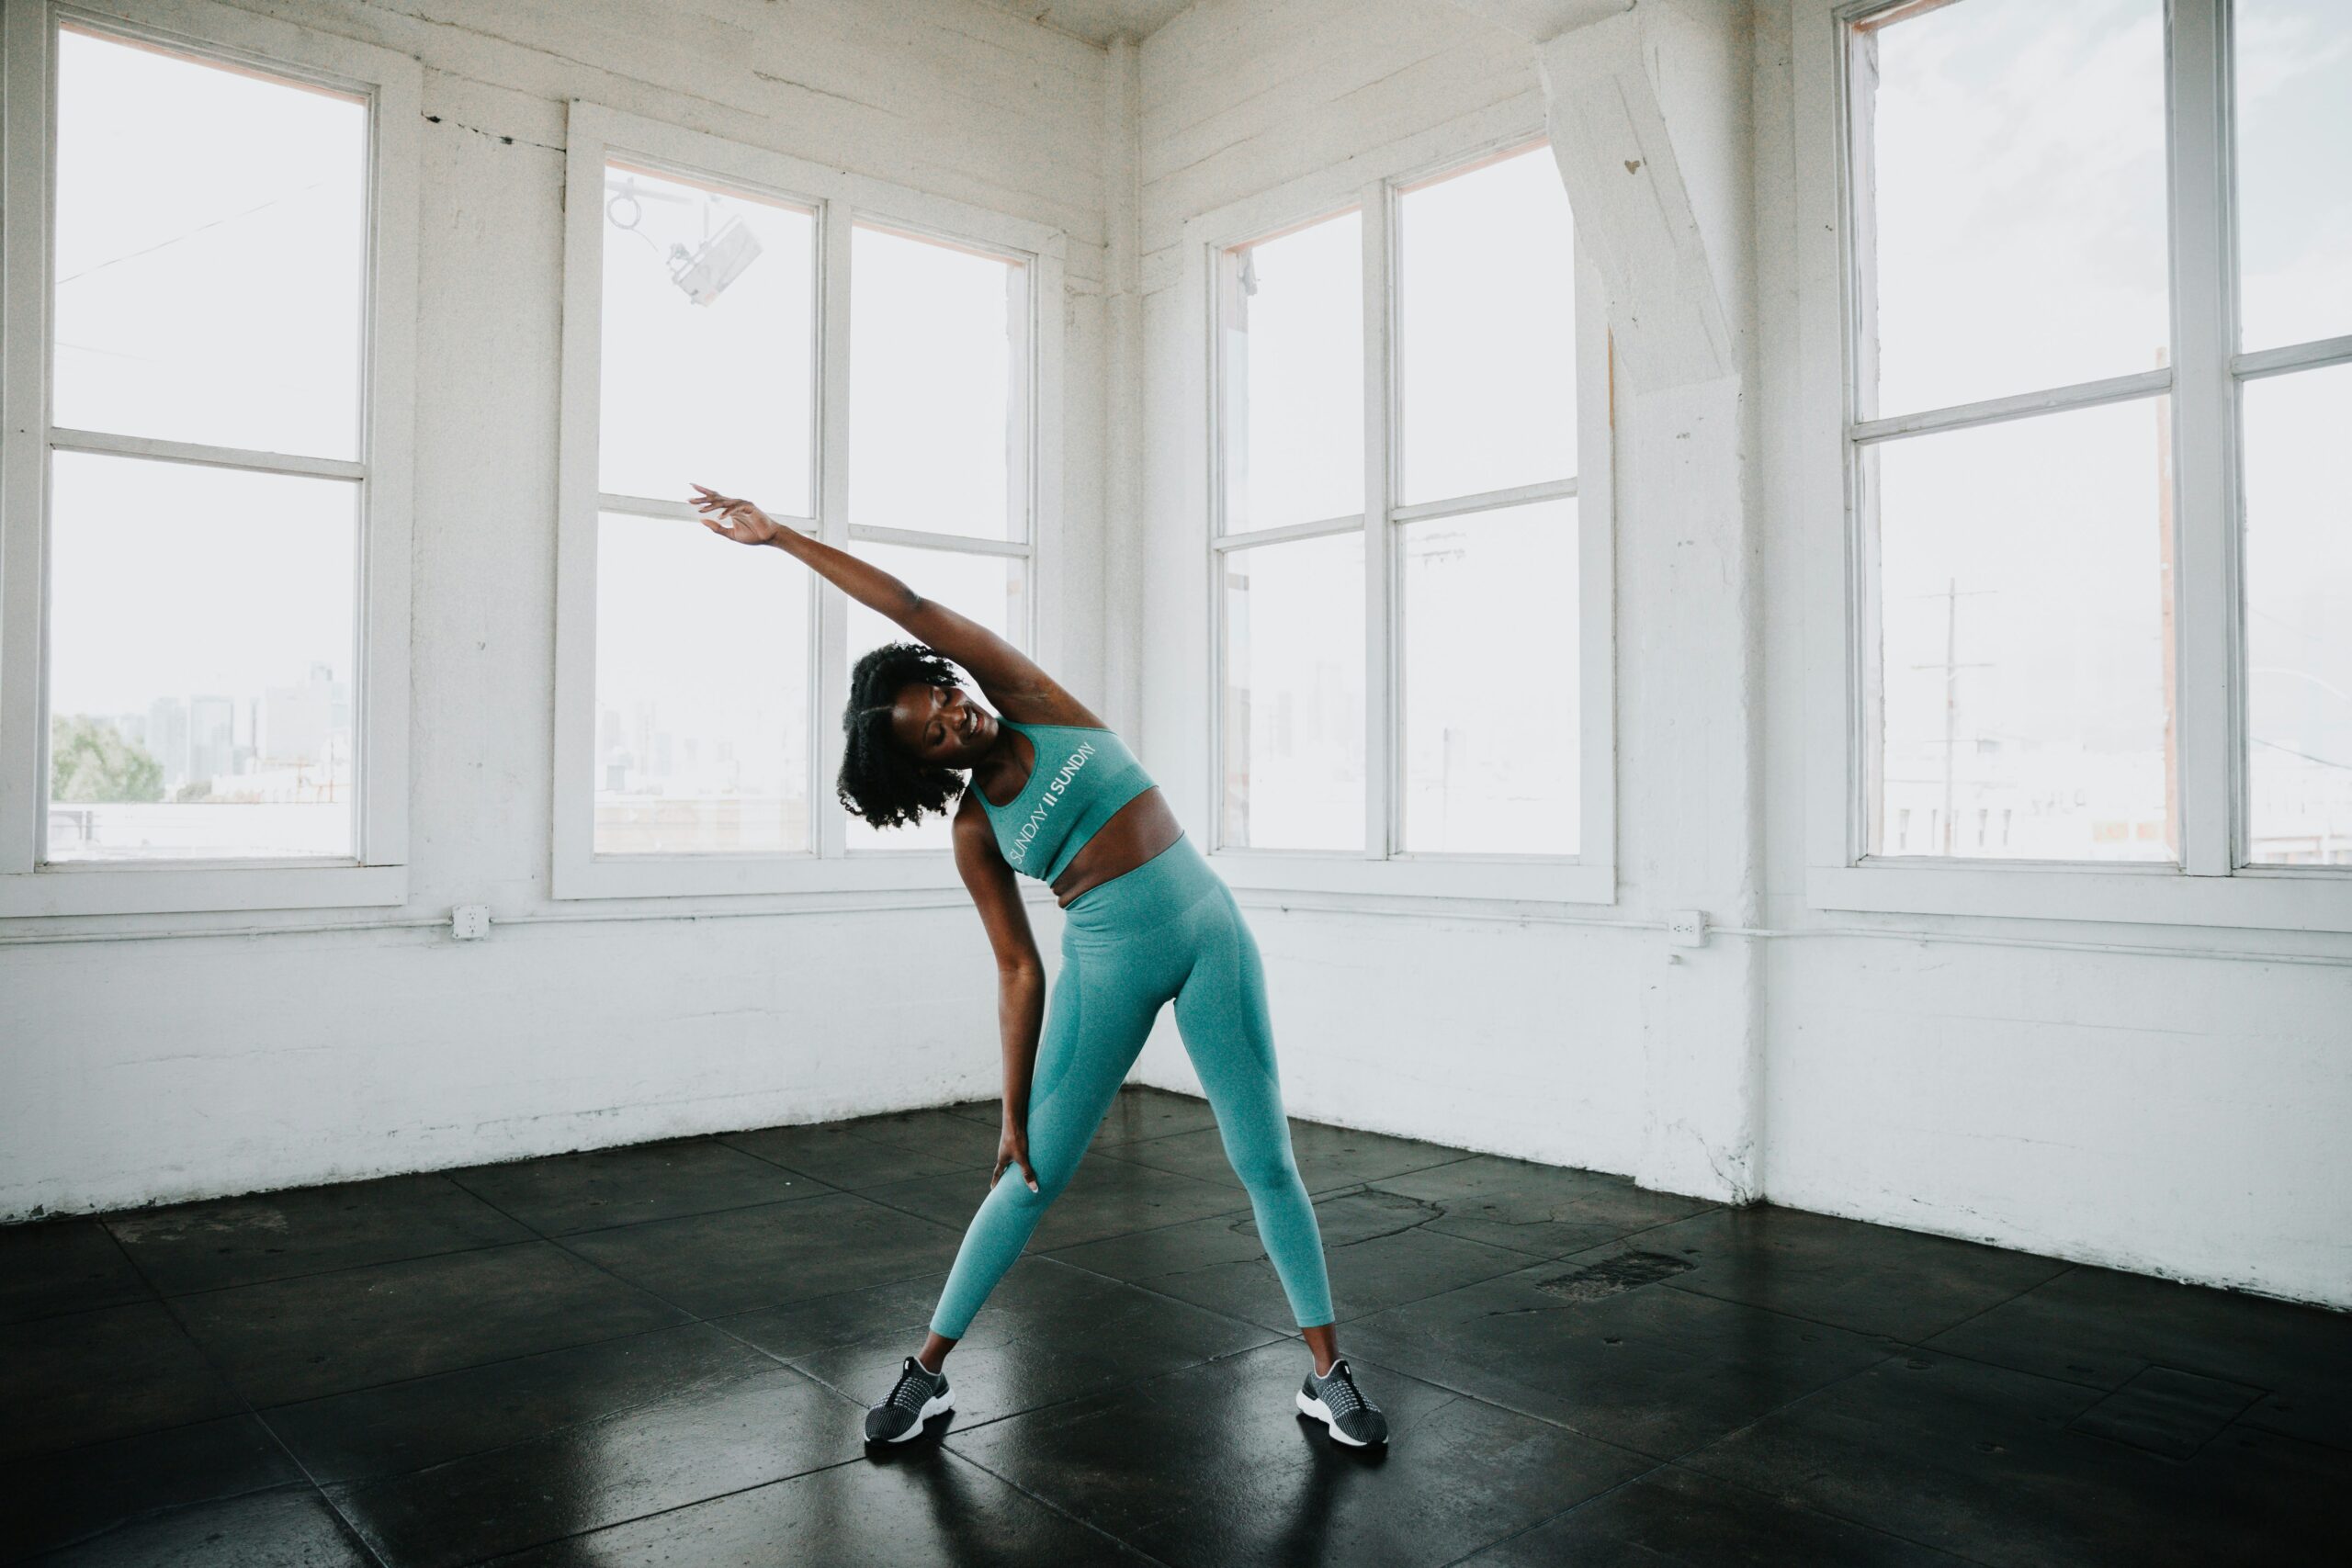 For fitness, dance and pilates, follow this at home instructor on Youtube: Pictured: A Black woman exercising